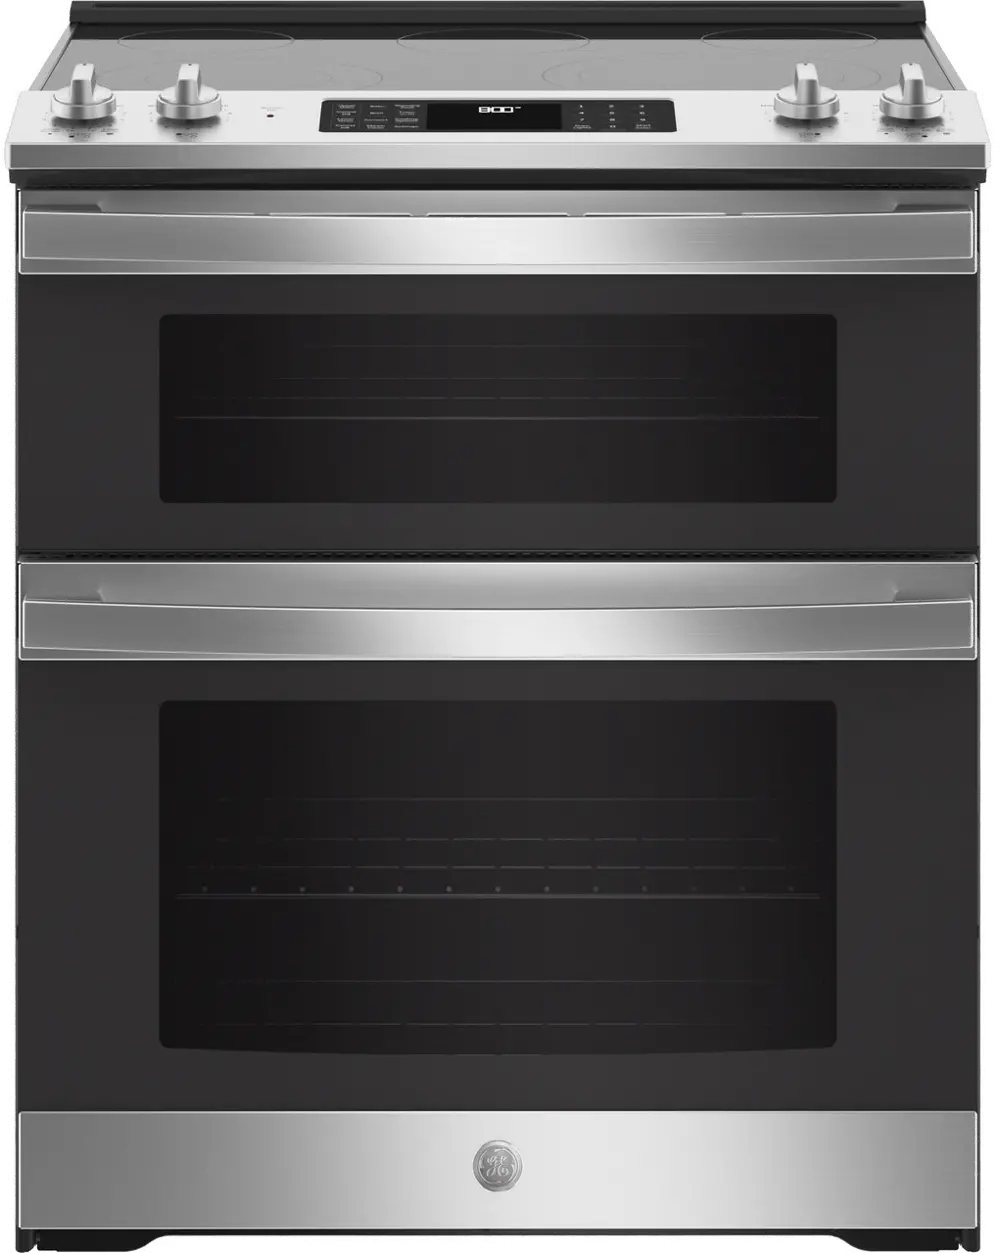 JSS86SPSS-OLD GE Slide In Double Oven Electric Range with Convection - 6.6 cu. ft., Stainless Steel-1